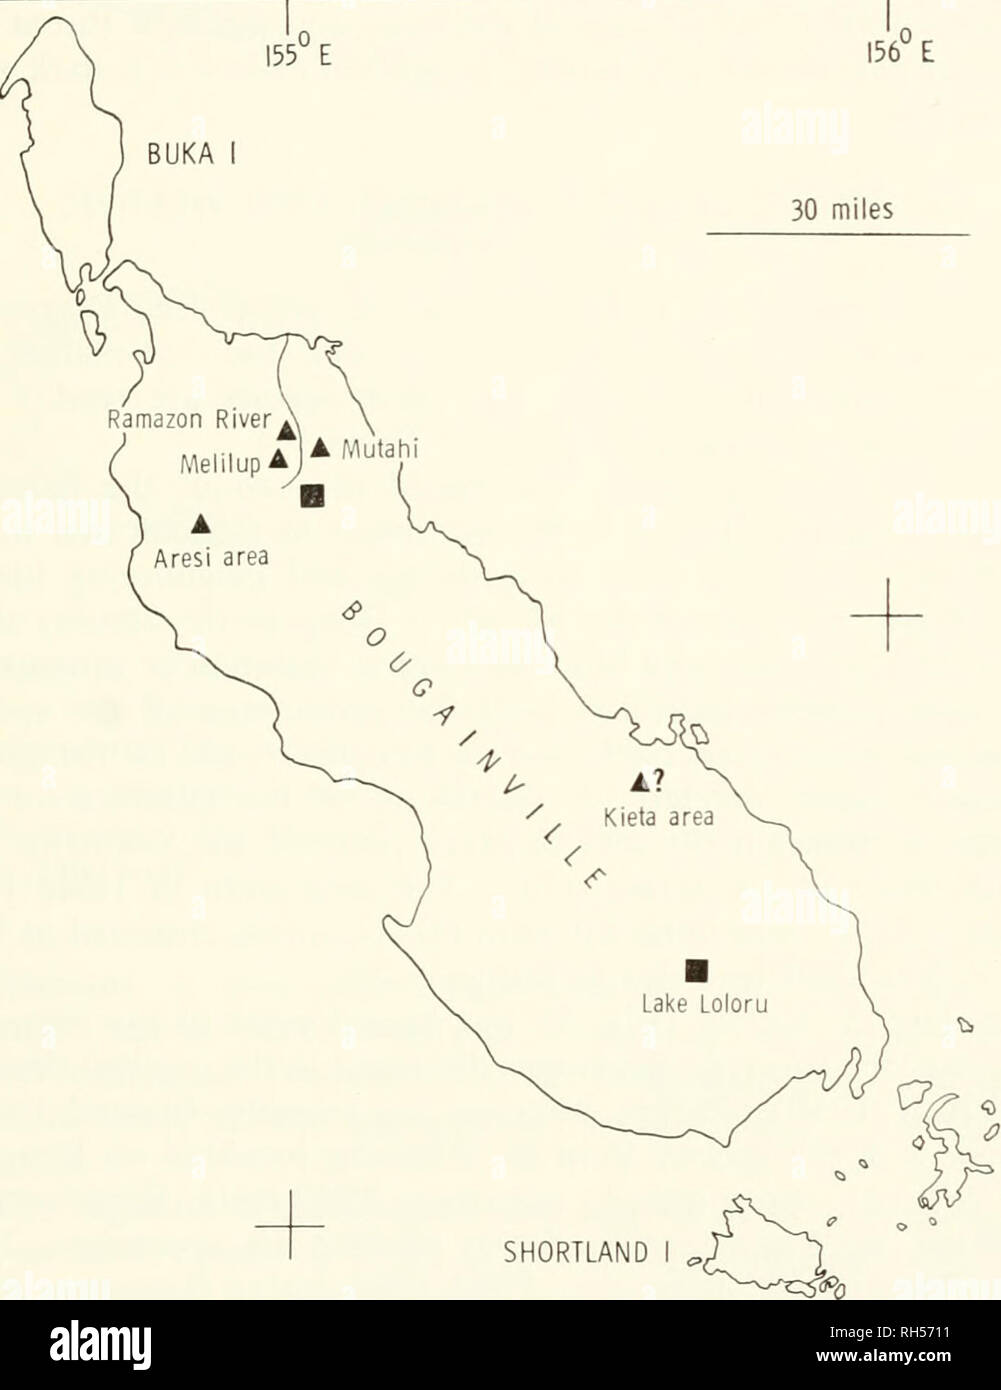 . Breviora. 1967 NEW BOUGAINVILLE SKINK Distribution (Fig. 2): The seven known specimens of S. frago- sus are from between 4000-4300 feet, in the central highlands of Bougainville. Six specimens were taken in southcentral Bougain- ville (Lake Loloru, 4300 feet) and the seventh was collected in northeastern Bougainville (near Mutahi, 4000 feet). The 2 locali- ties are approximately 70 miles apart. 156° E 30 miles 6°S 7°S SHORTLAND. 6°S FAURO 7°S- I55°E MONO I C^ 156° E Figure 2. Map of Bougainville, Solomon Islands, showing the known collecting localities for Sphenomorphus fragosus (squares) an Stock Photo